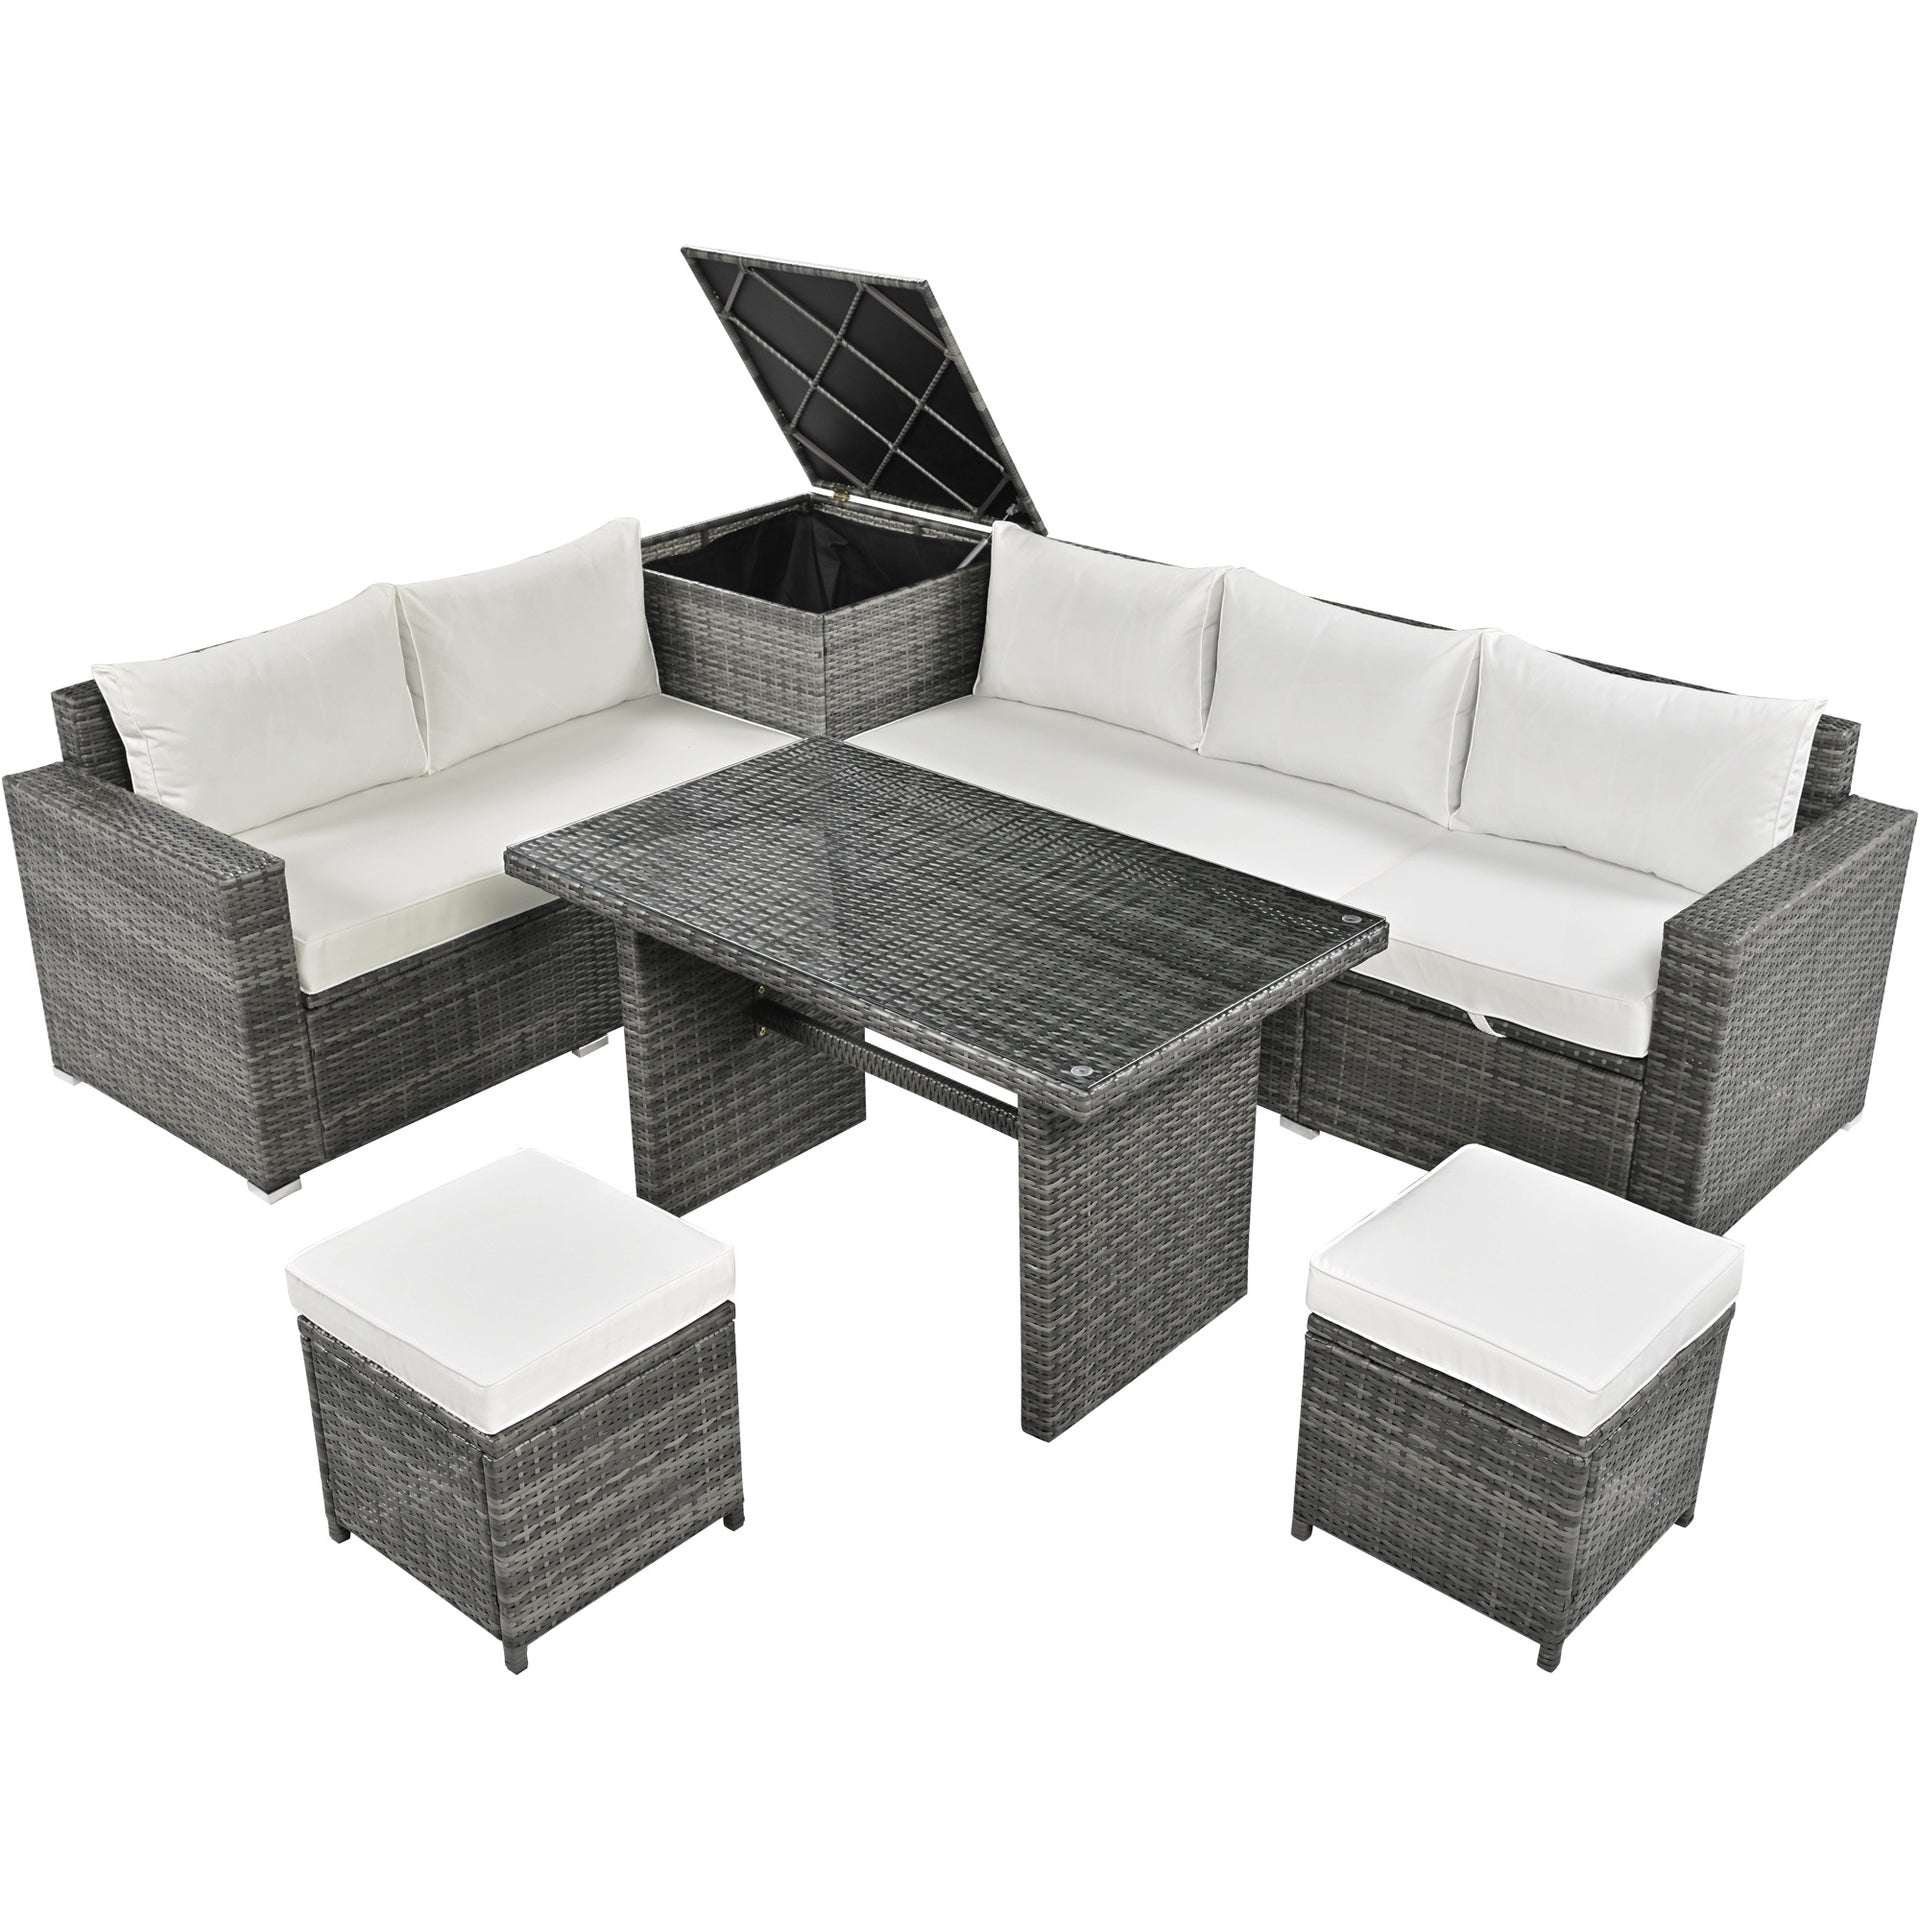 6-Piece Garden Patio Sectional Sofa Set with Storage and Removable Covers